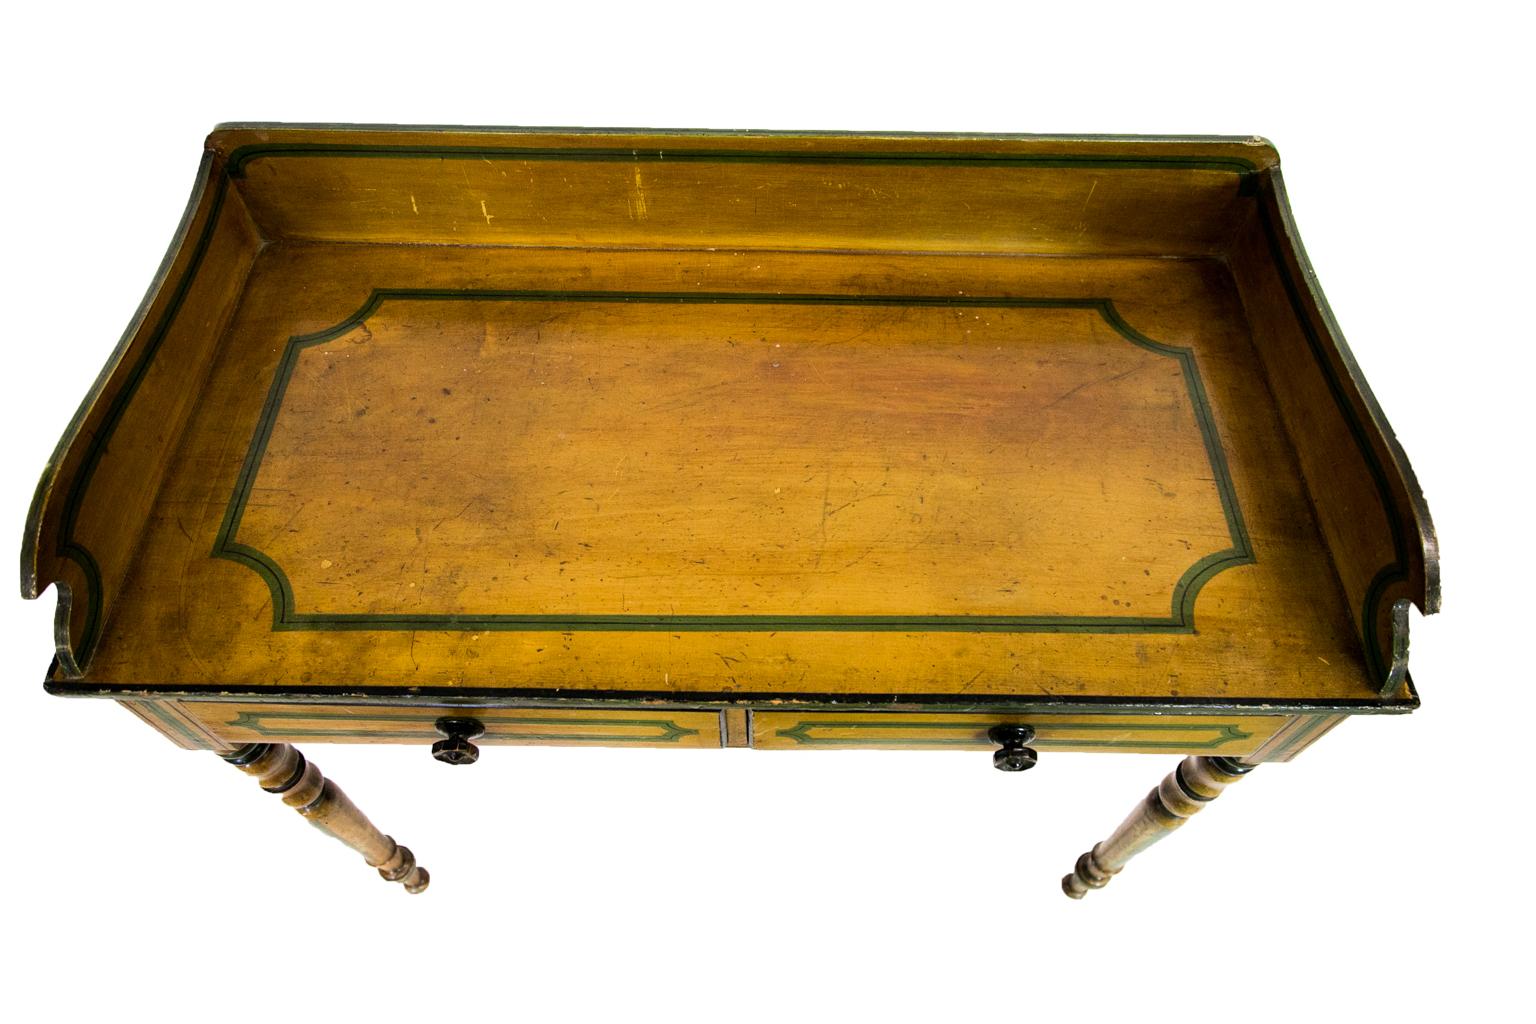 The top of this English painted serving table is mustard color with green and black bindings simulating ebony inlay on the tops, drawer fronts, legs, and sides. The drawer has the original carved octagonal wooden knobs. The top surface has markings